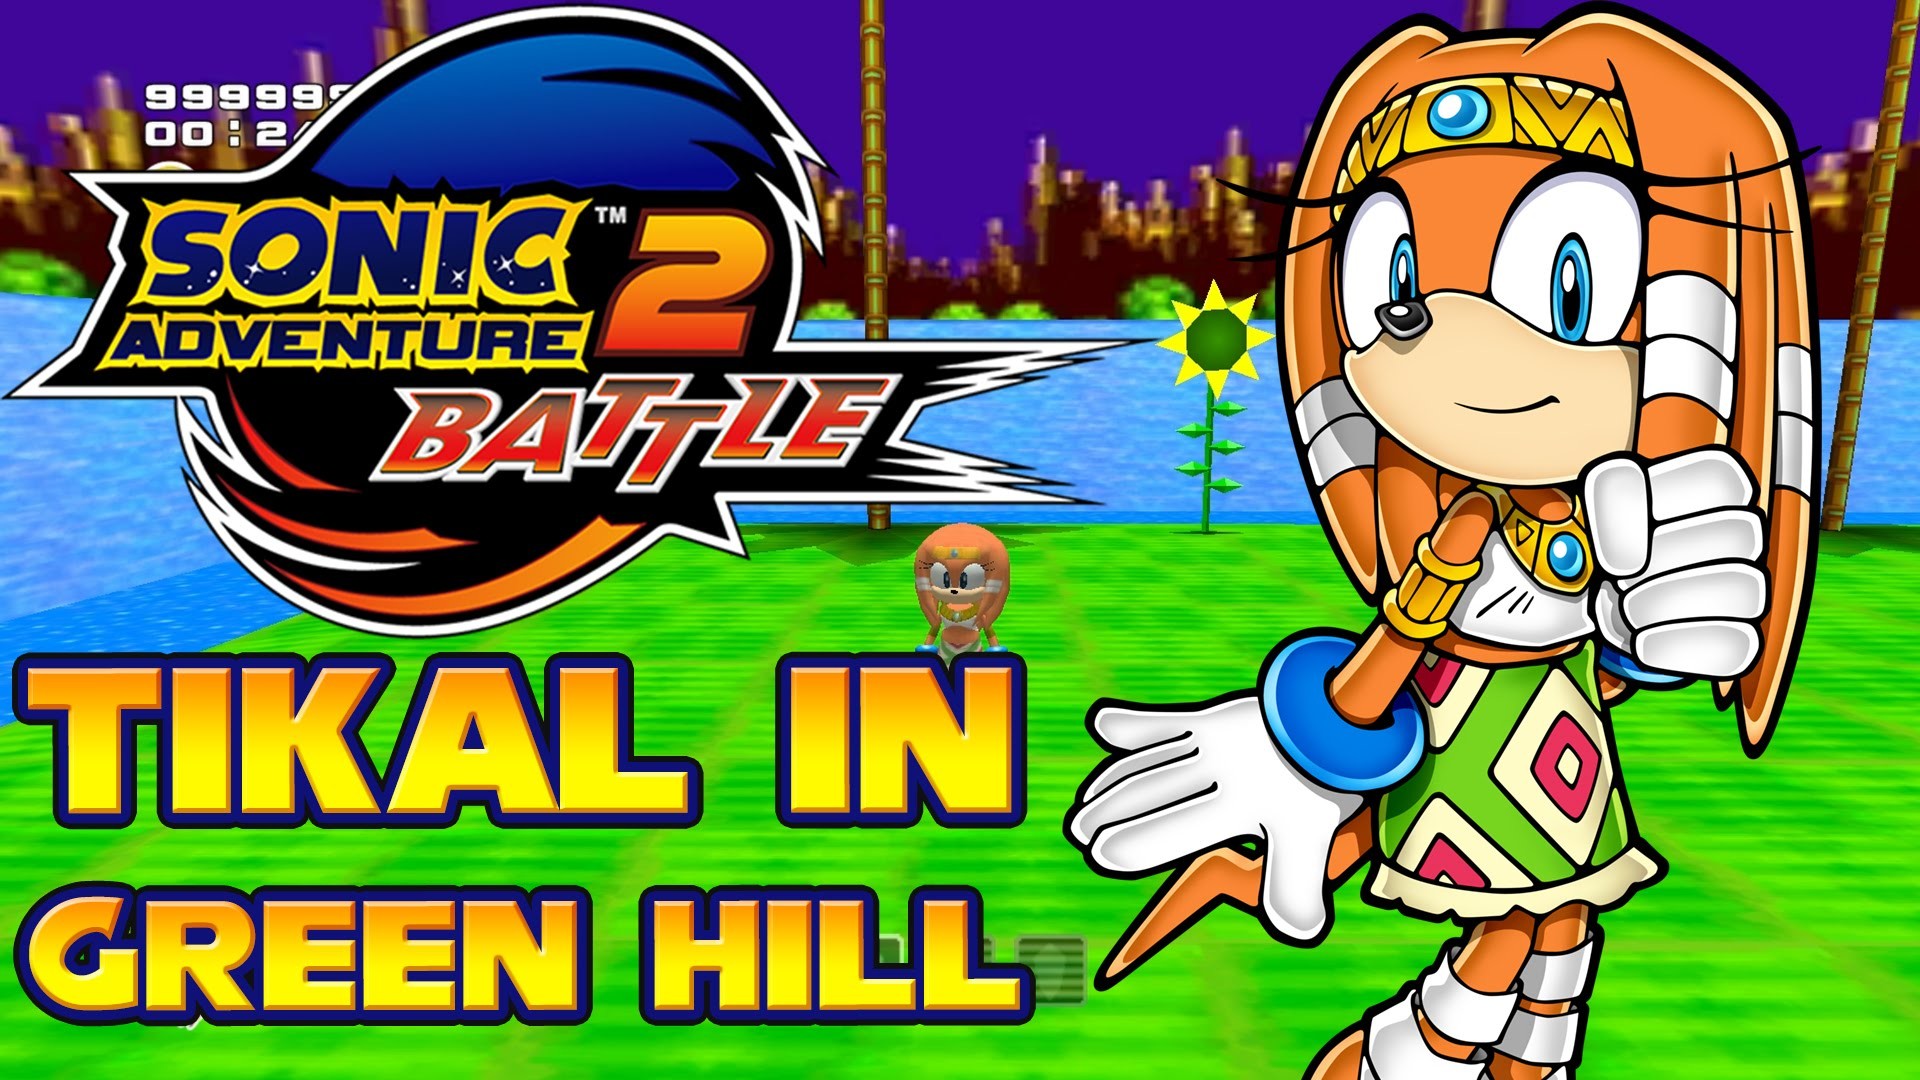 1920x1080 Sonic Adventure 2 (PC) - Tikal in Green Hill Hack (1080p 60FPS) - YouTube